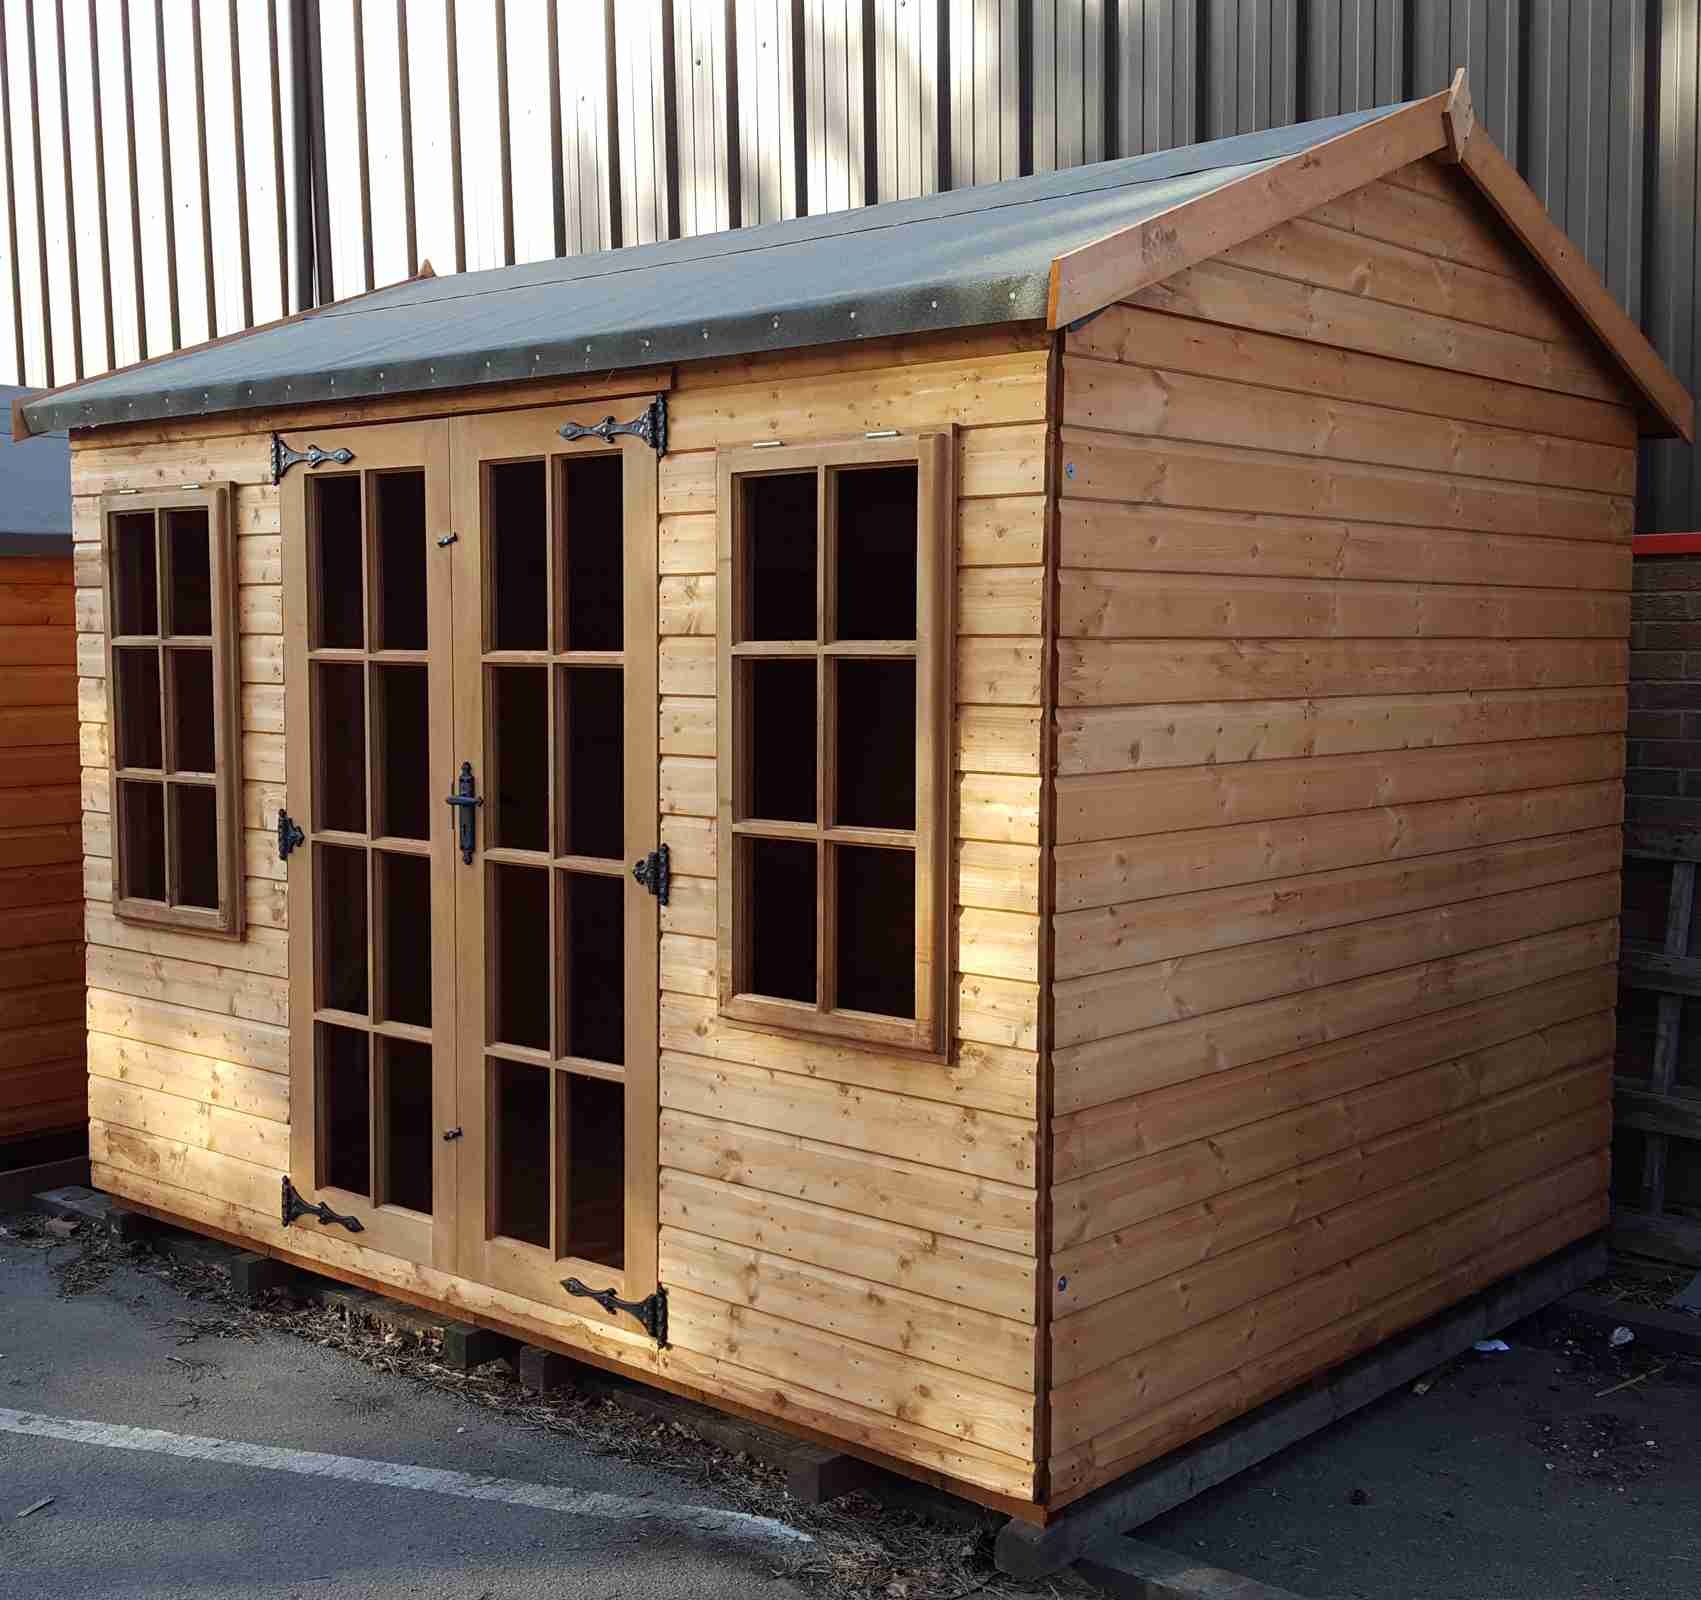 Major Apex 'Conversion' 1008: Cotswold doors & windows (6 pane). Alternatively available with large pane doors and windows